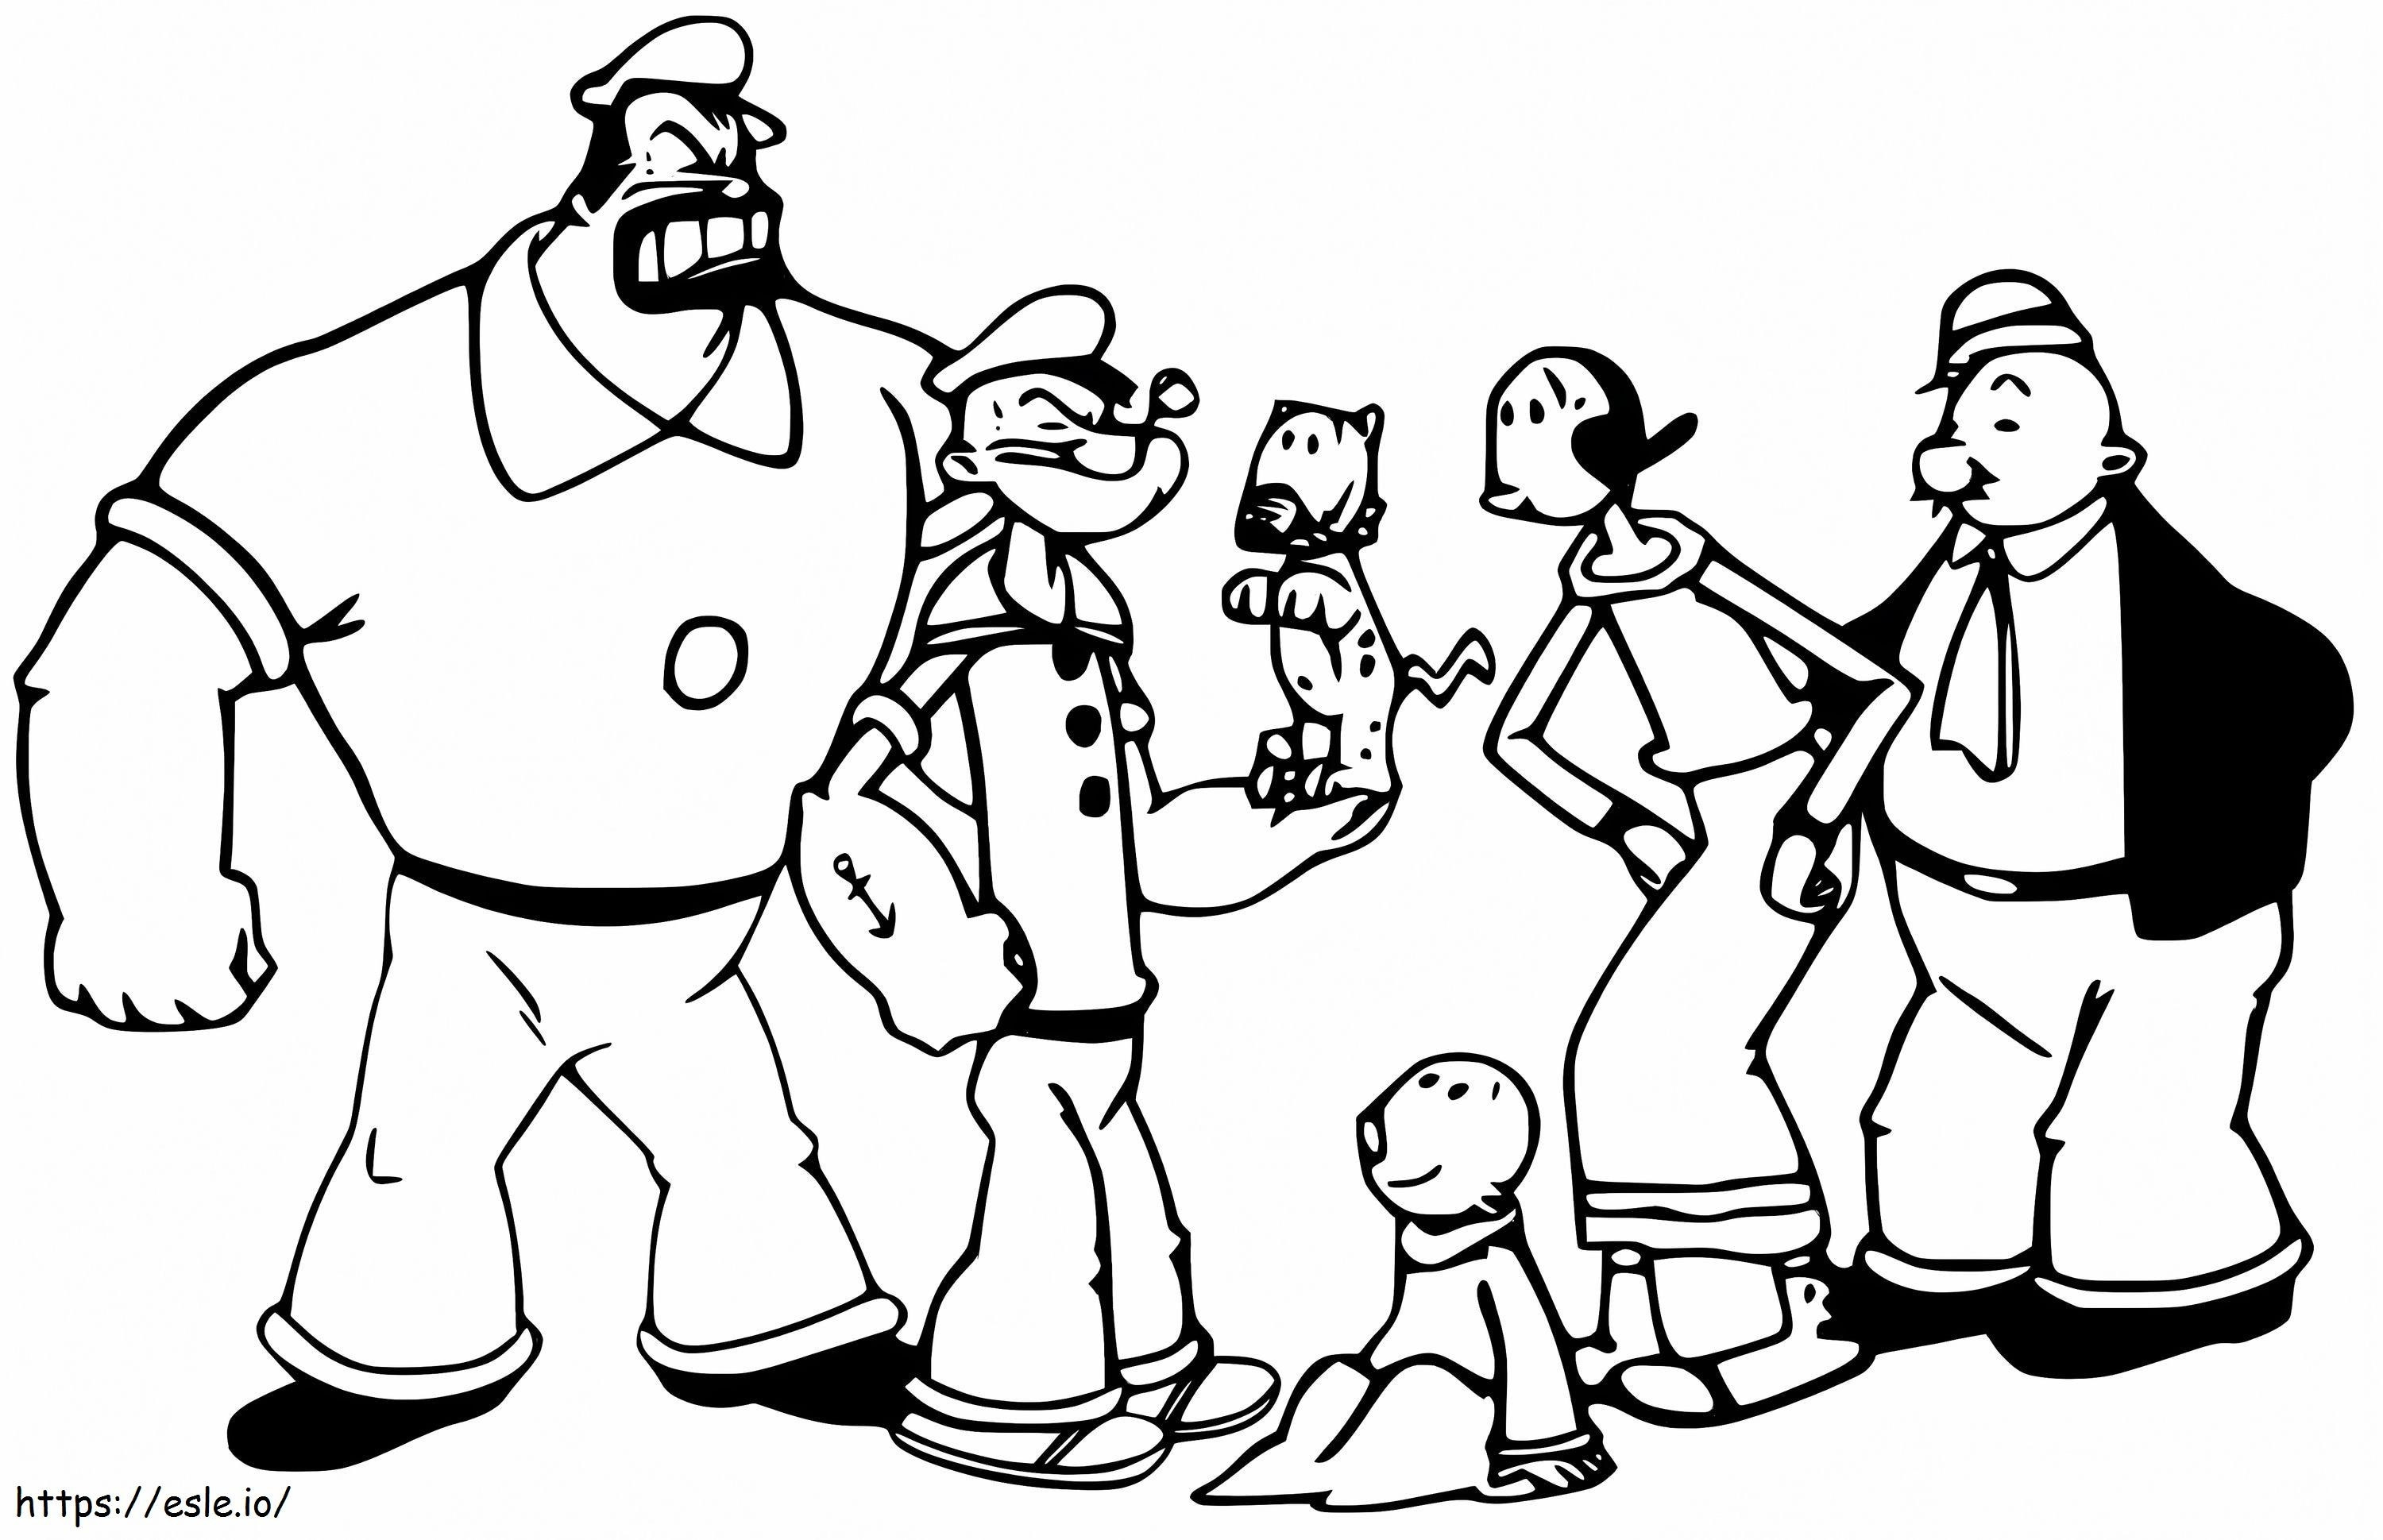 Popeye Characters coloring page